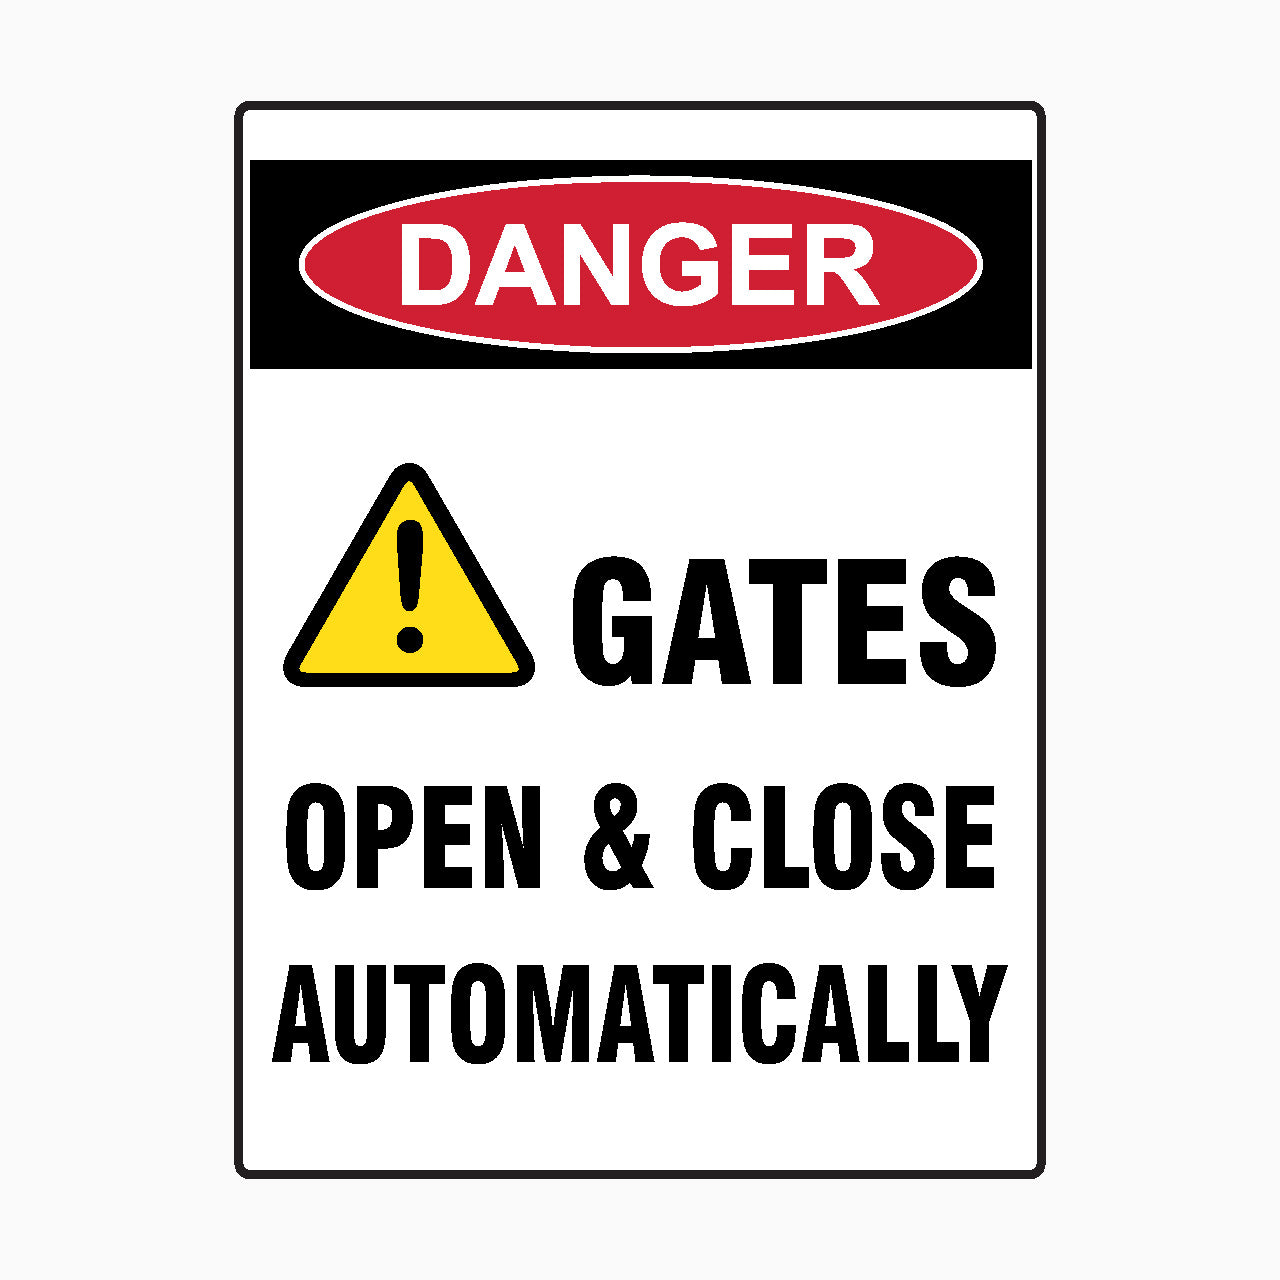 DANGER SIGNS - GATES OPEN & CLOSE AUTOMATICALLY SIGN